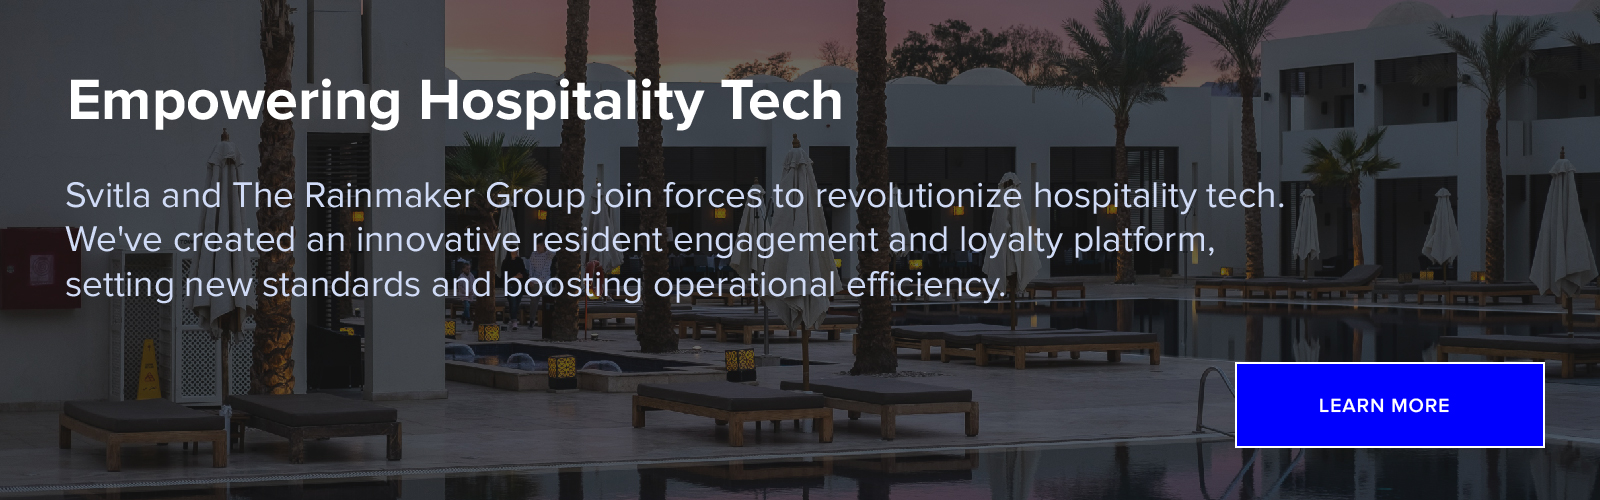 Empowering Hospitality Tech